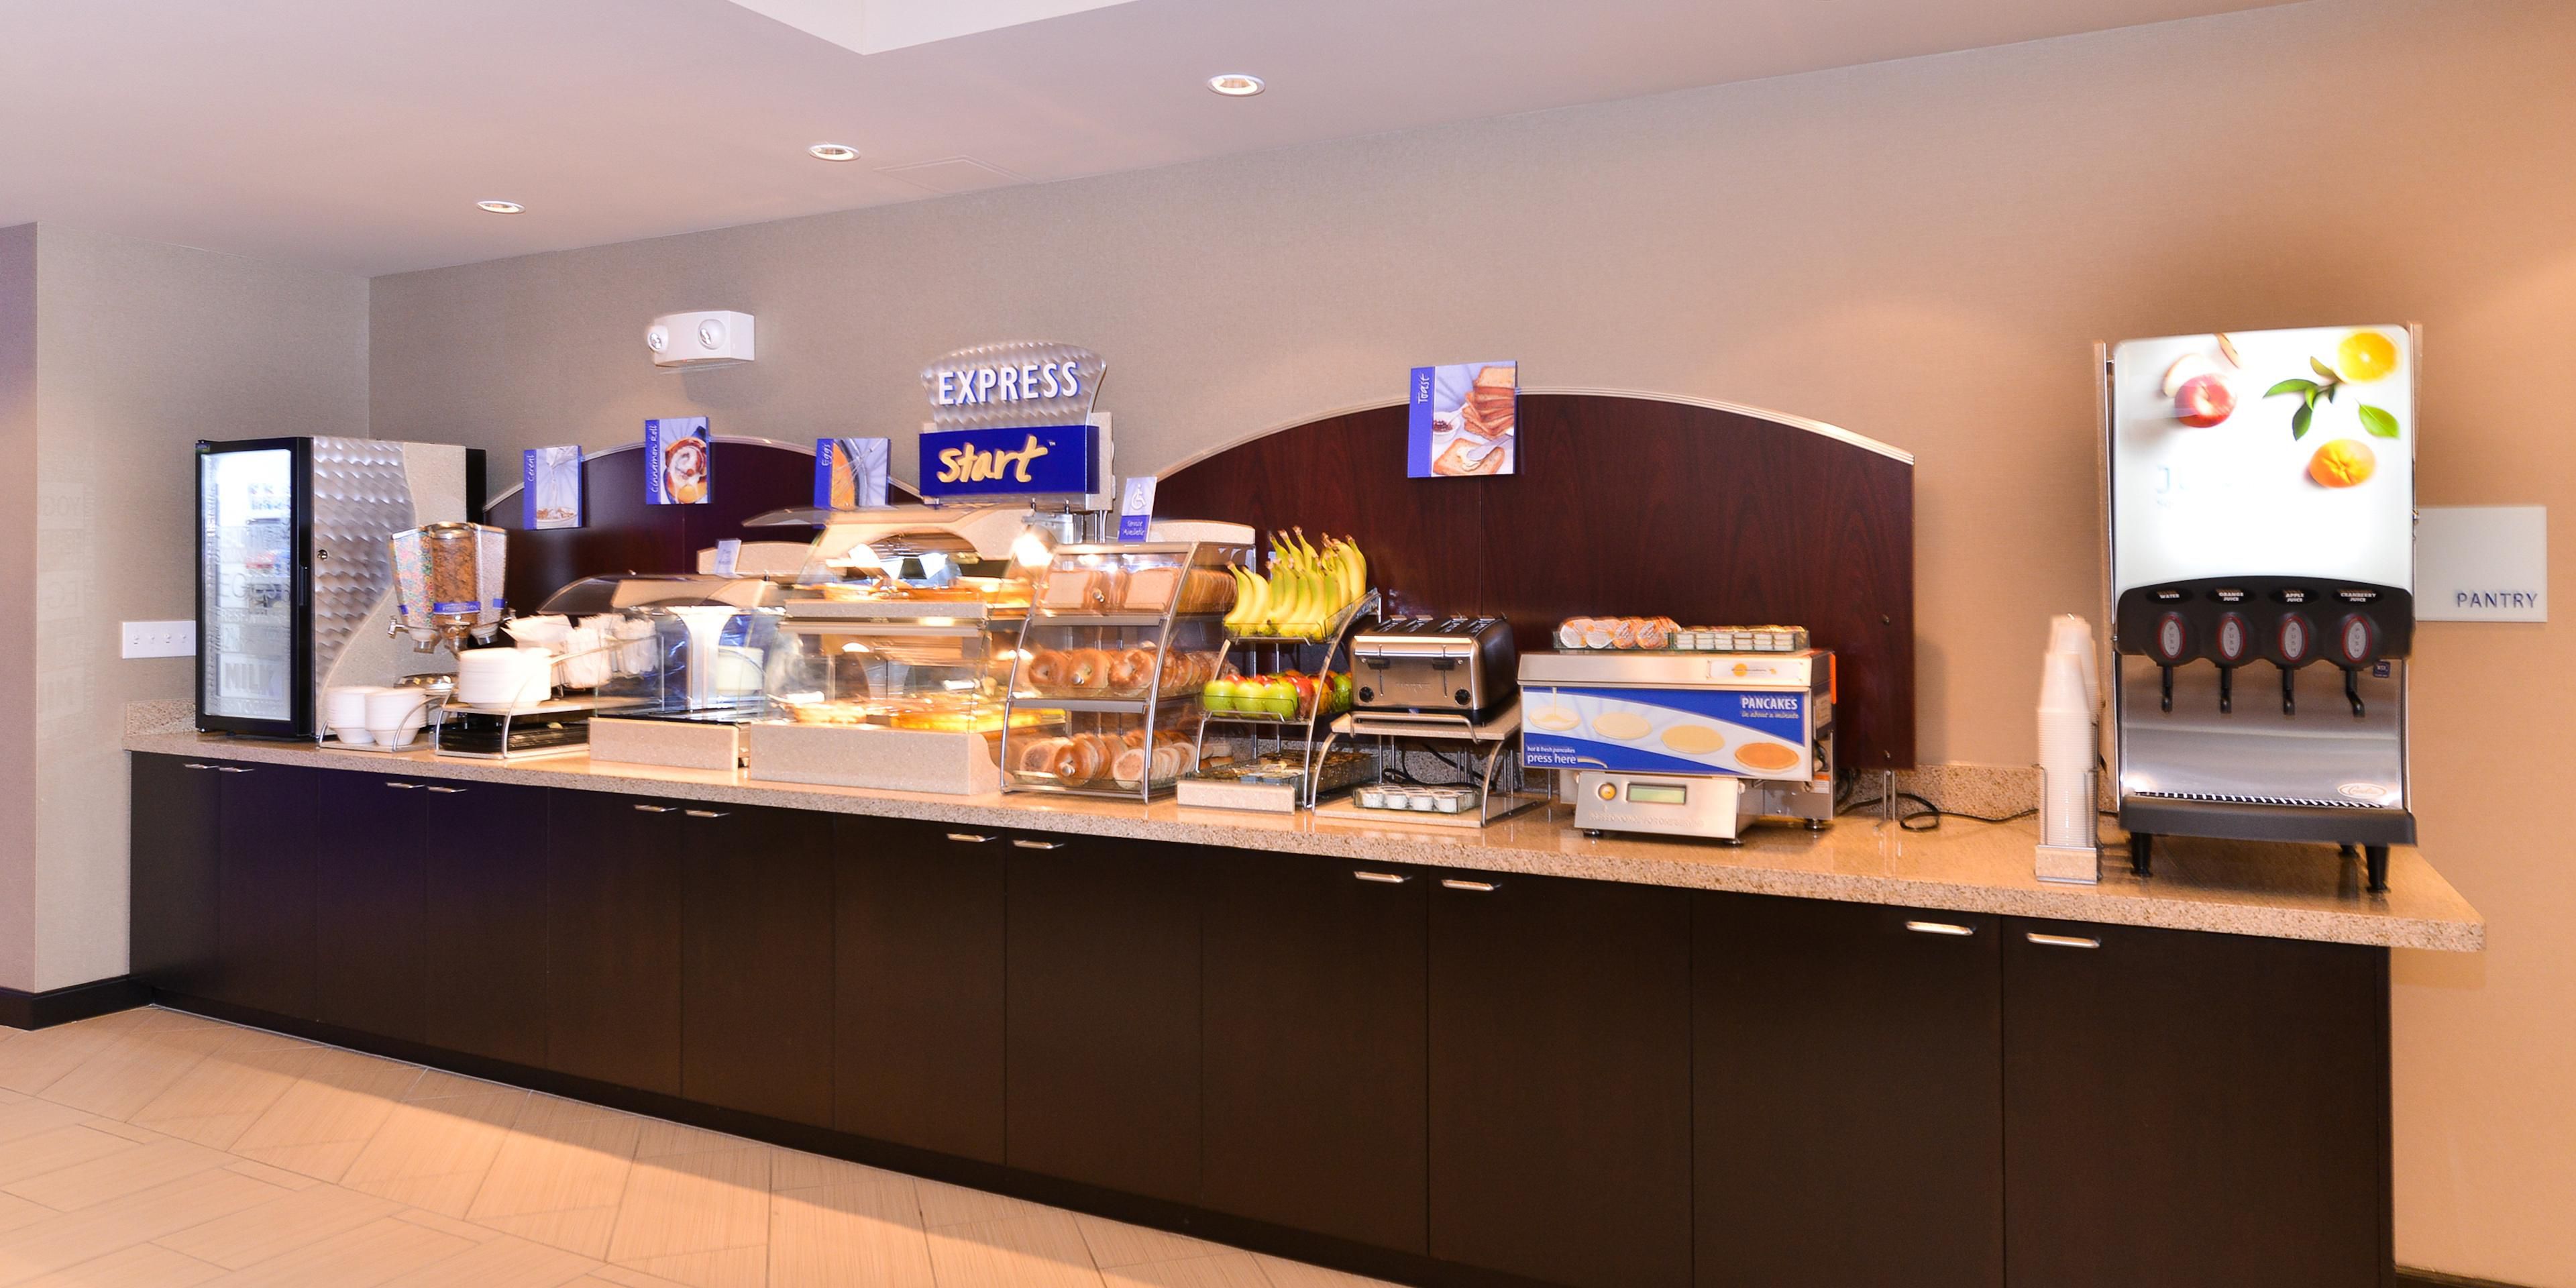 At Holiday Inn Express and Suites Indio we have a complimentary, hot breakfast waiting for you every morning. There's a whole buffet full of offerings sure to please everyone. Our Express Start Breakfast is the perfect way to begin your day.